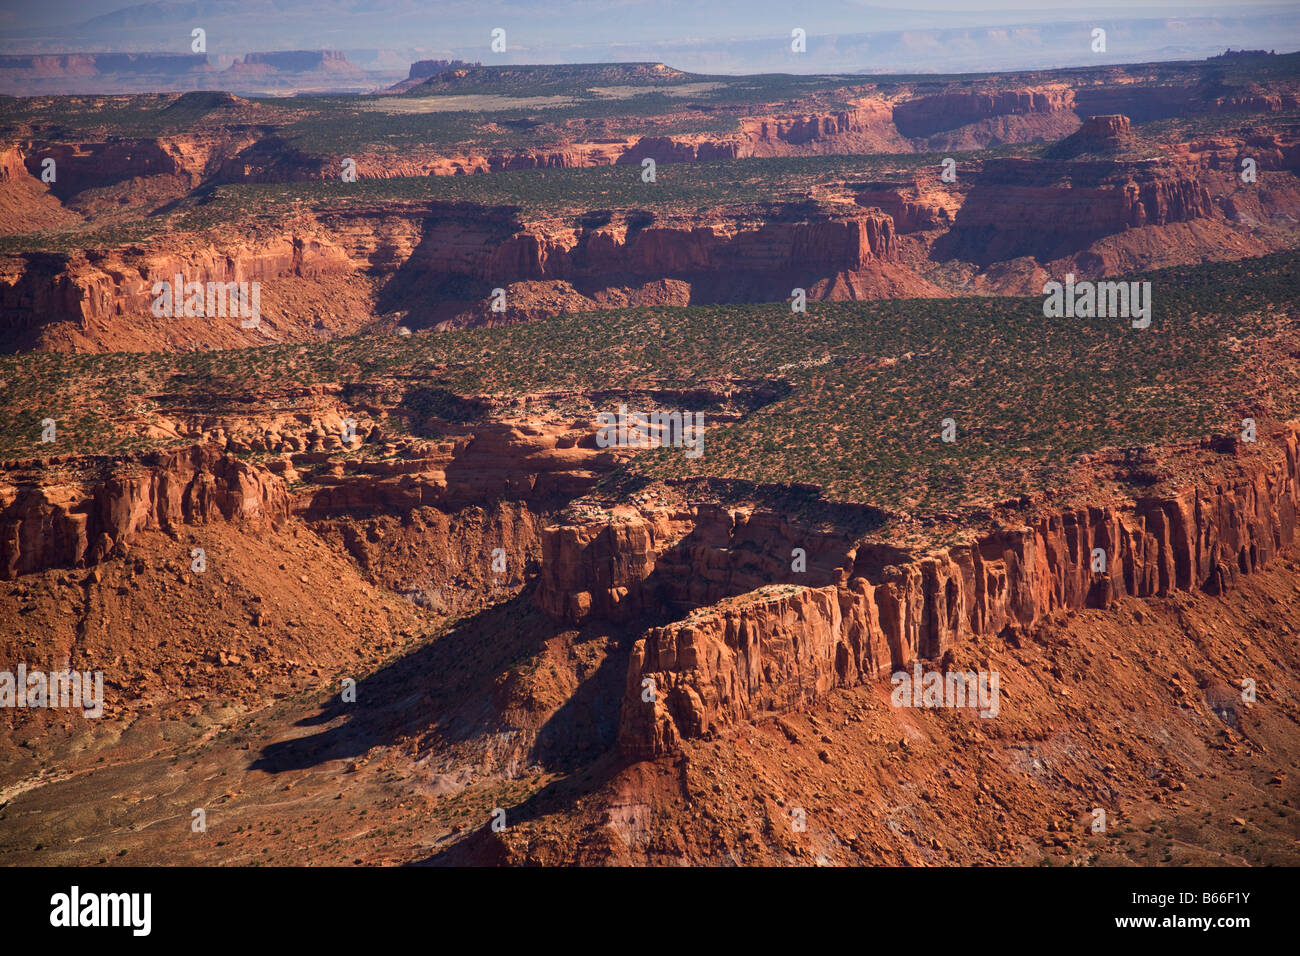 Robbers Roost area near Canyonlands National Park Utah Stock Photo